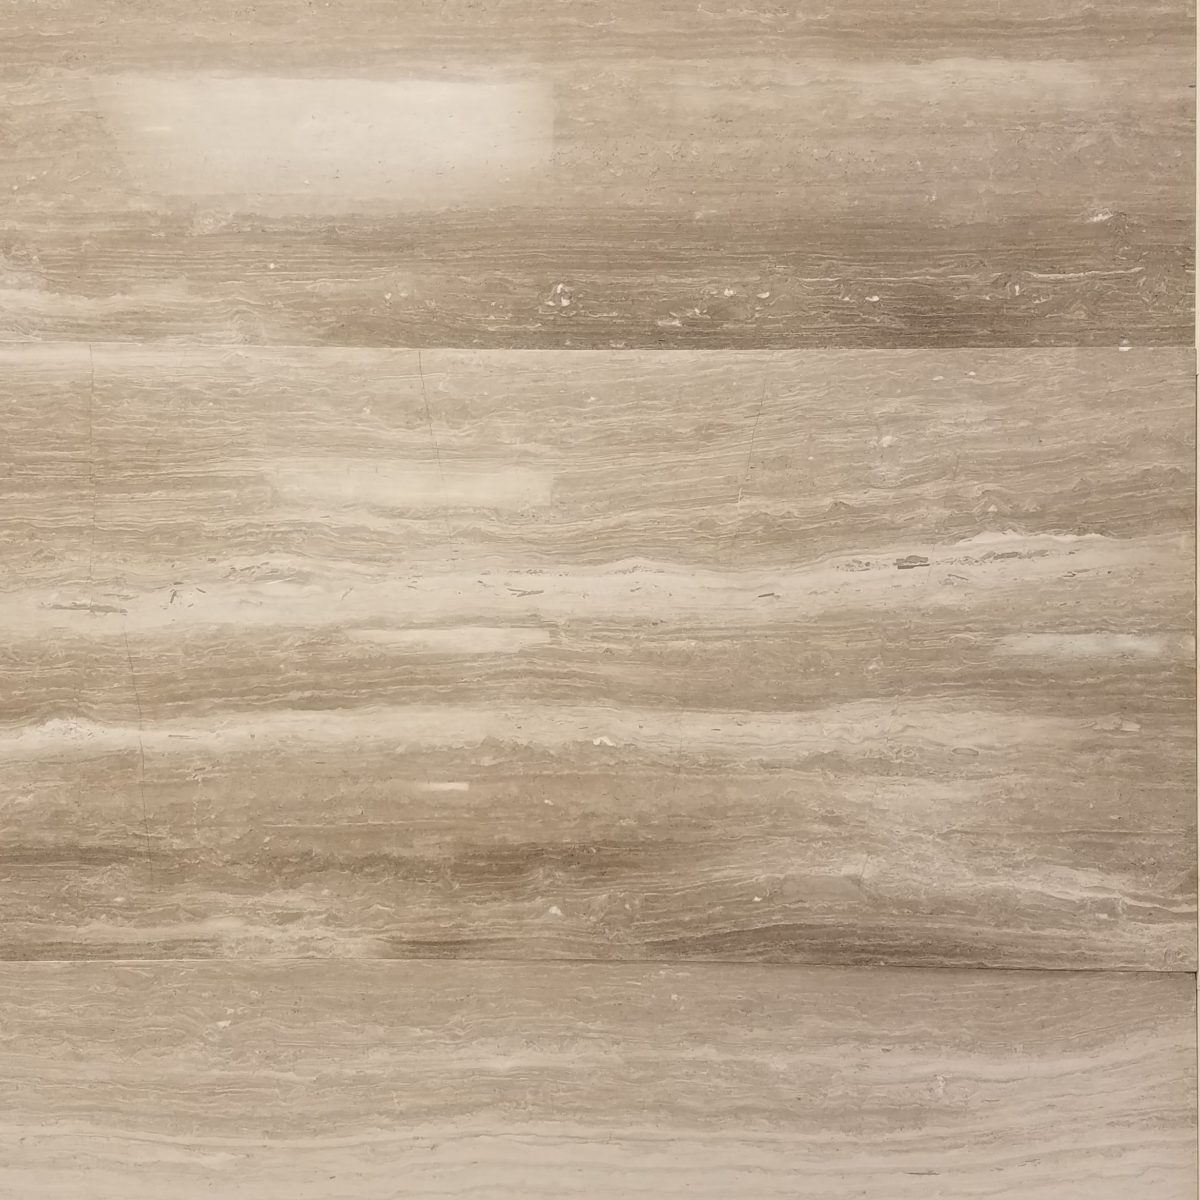 Wooden Gray Polished Marble Tile | Travertine and Marble – Tiles and